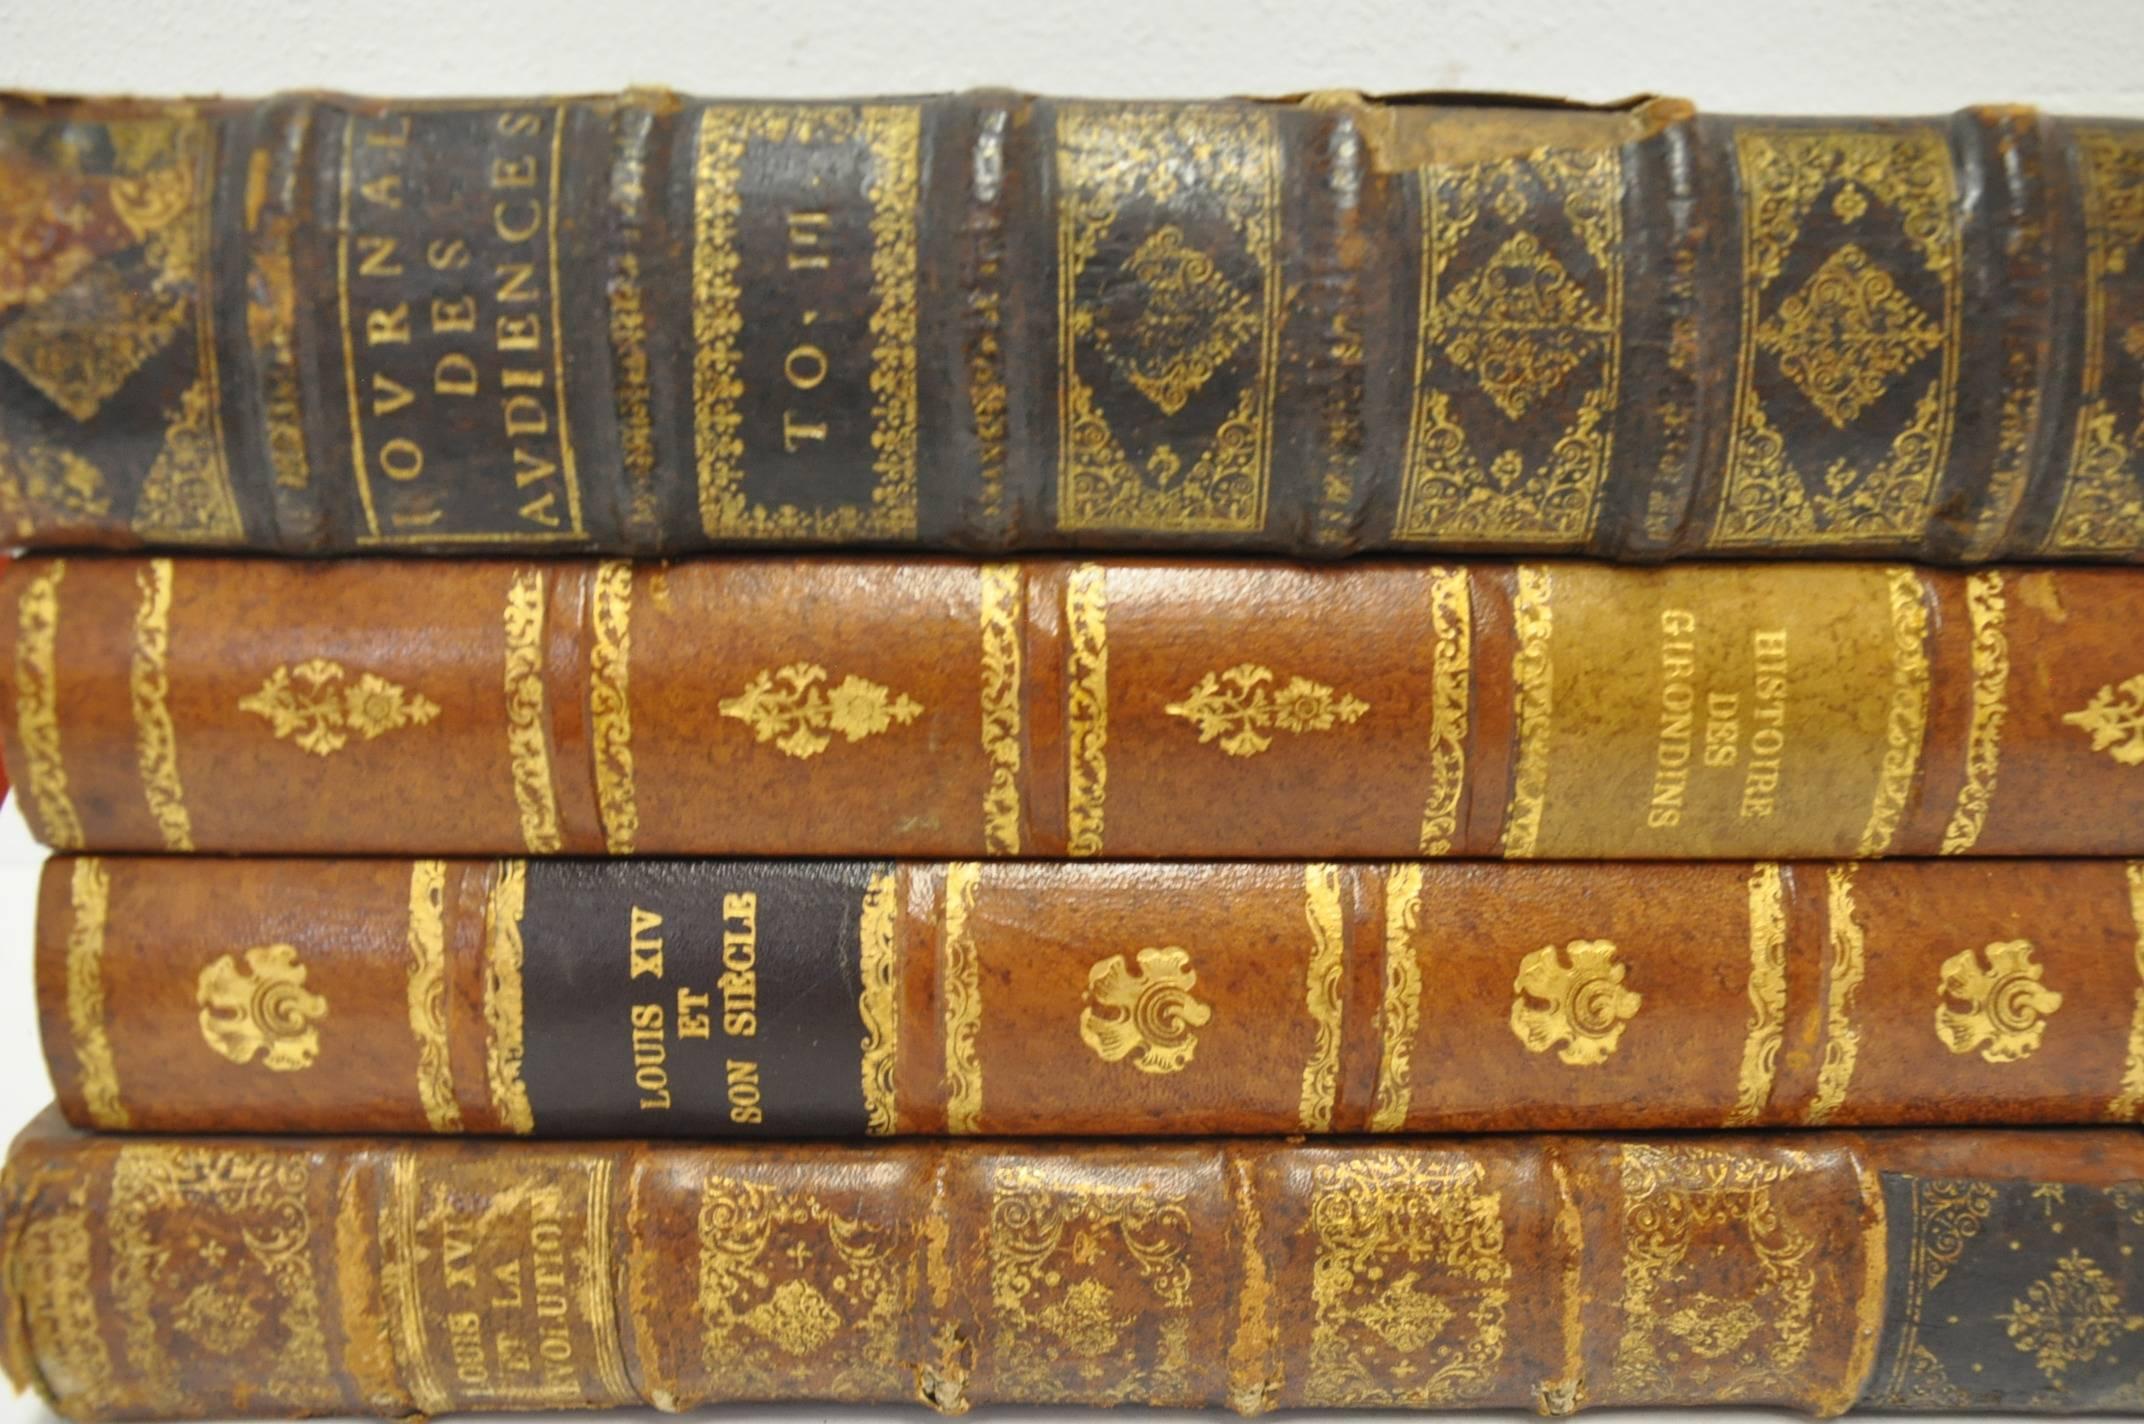 19th Century French Liquor Box Shaped like Four Leatherbound Books 4